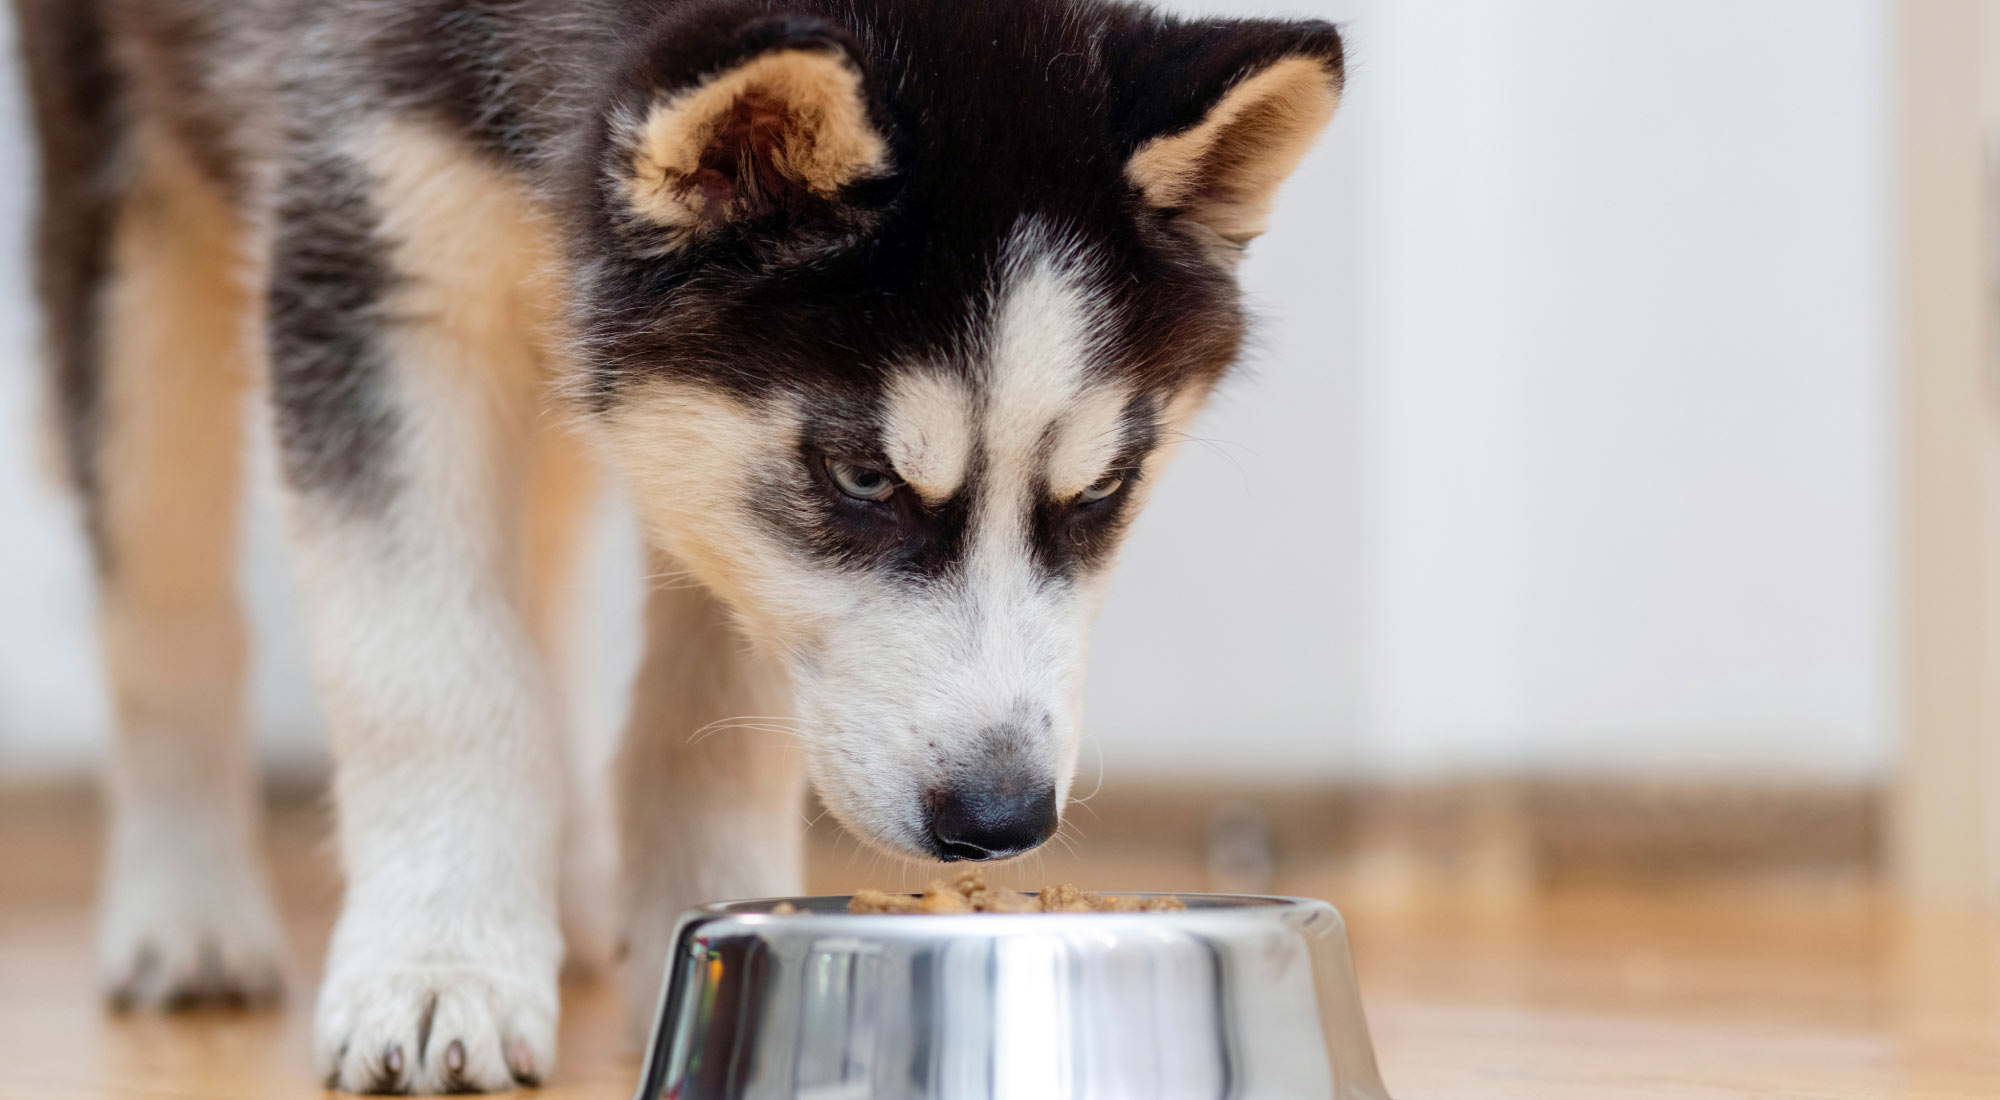 Husky dog about to eat kibble